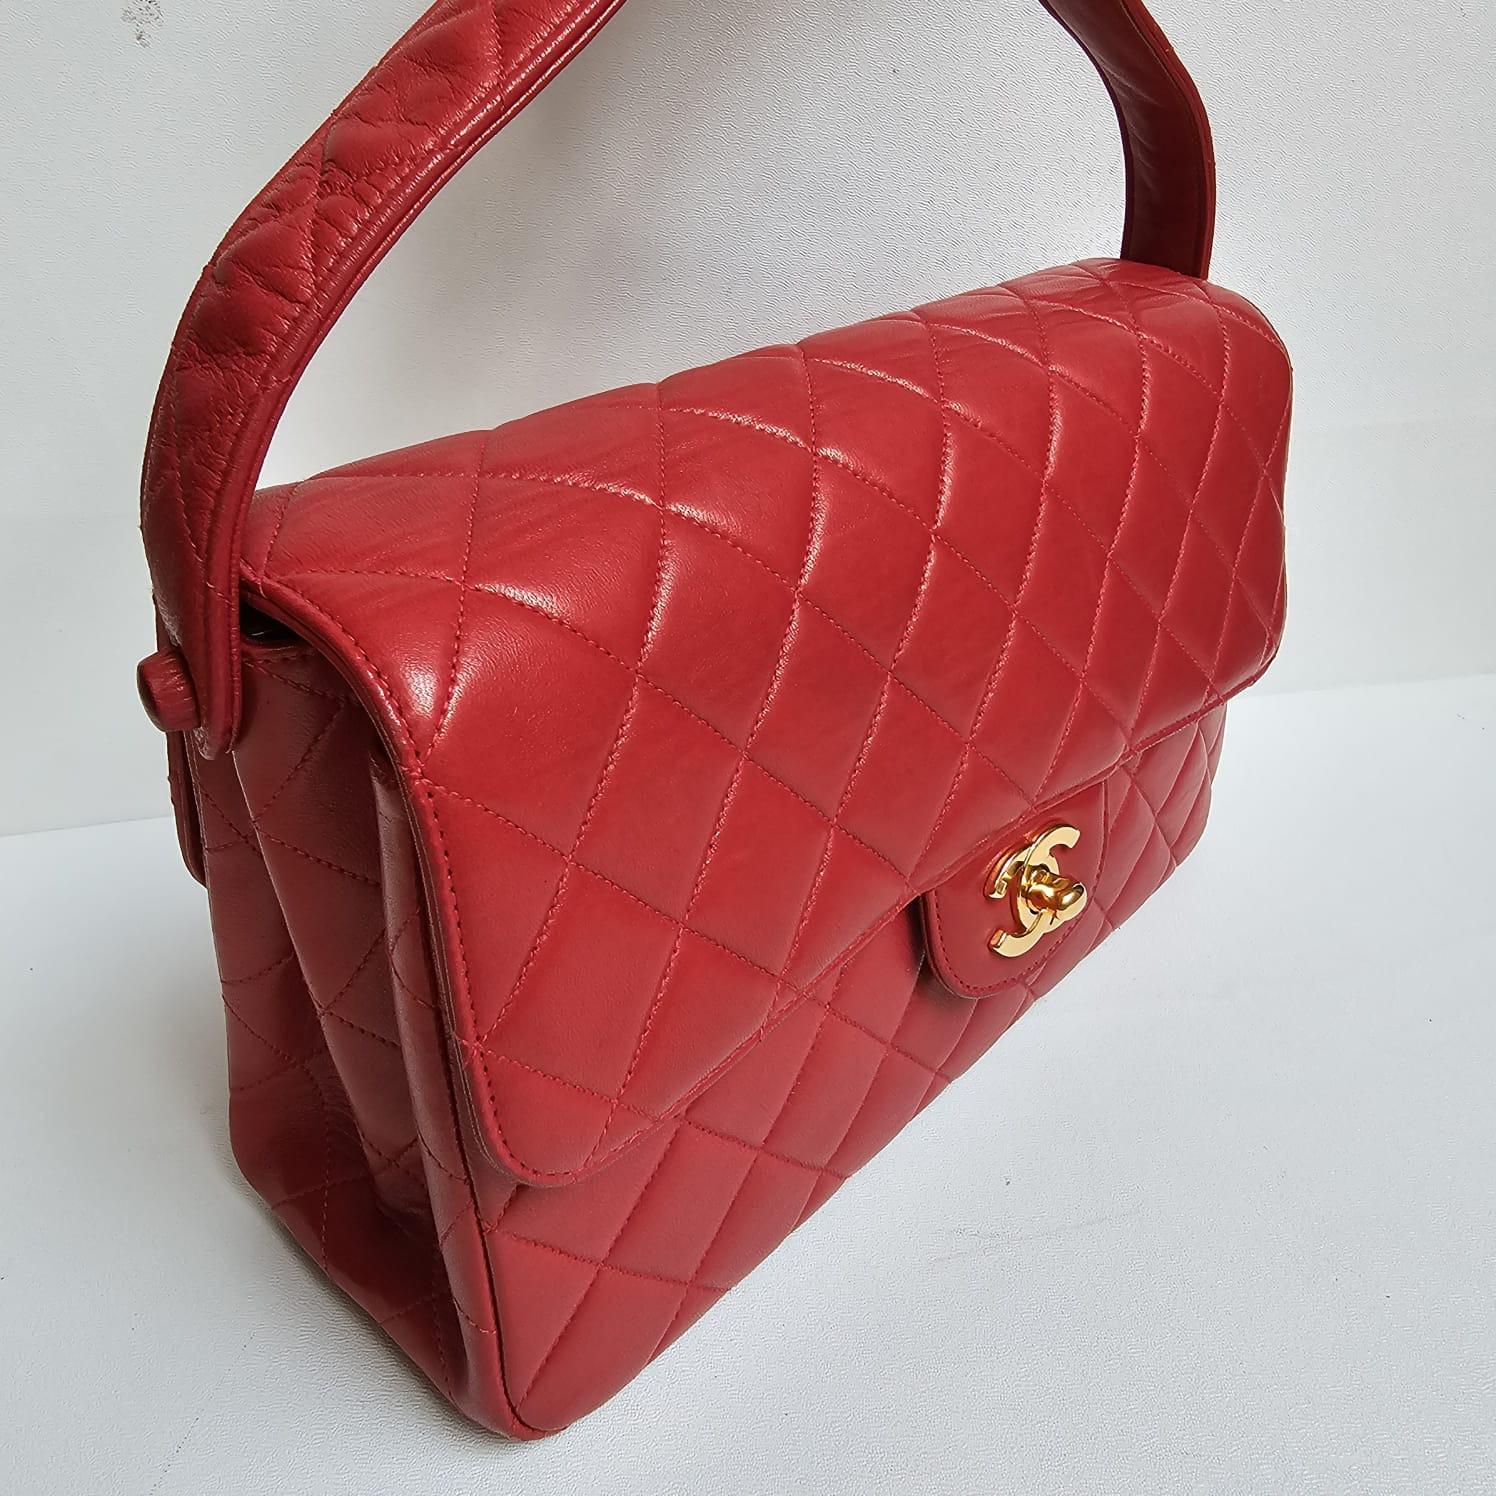 Chanel Vintage Red Lambskin Medium Quilted Double Face Top Handle Bag For Sale 12